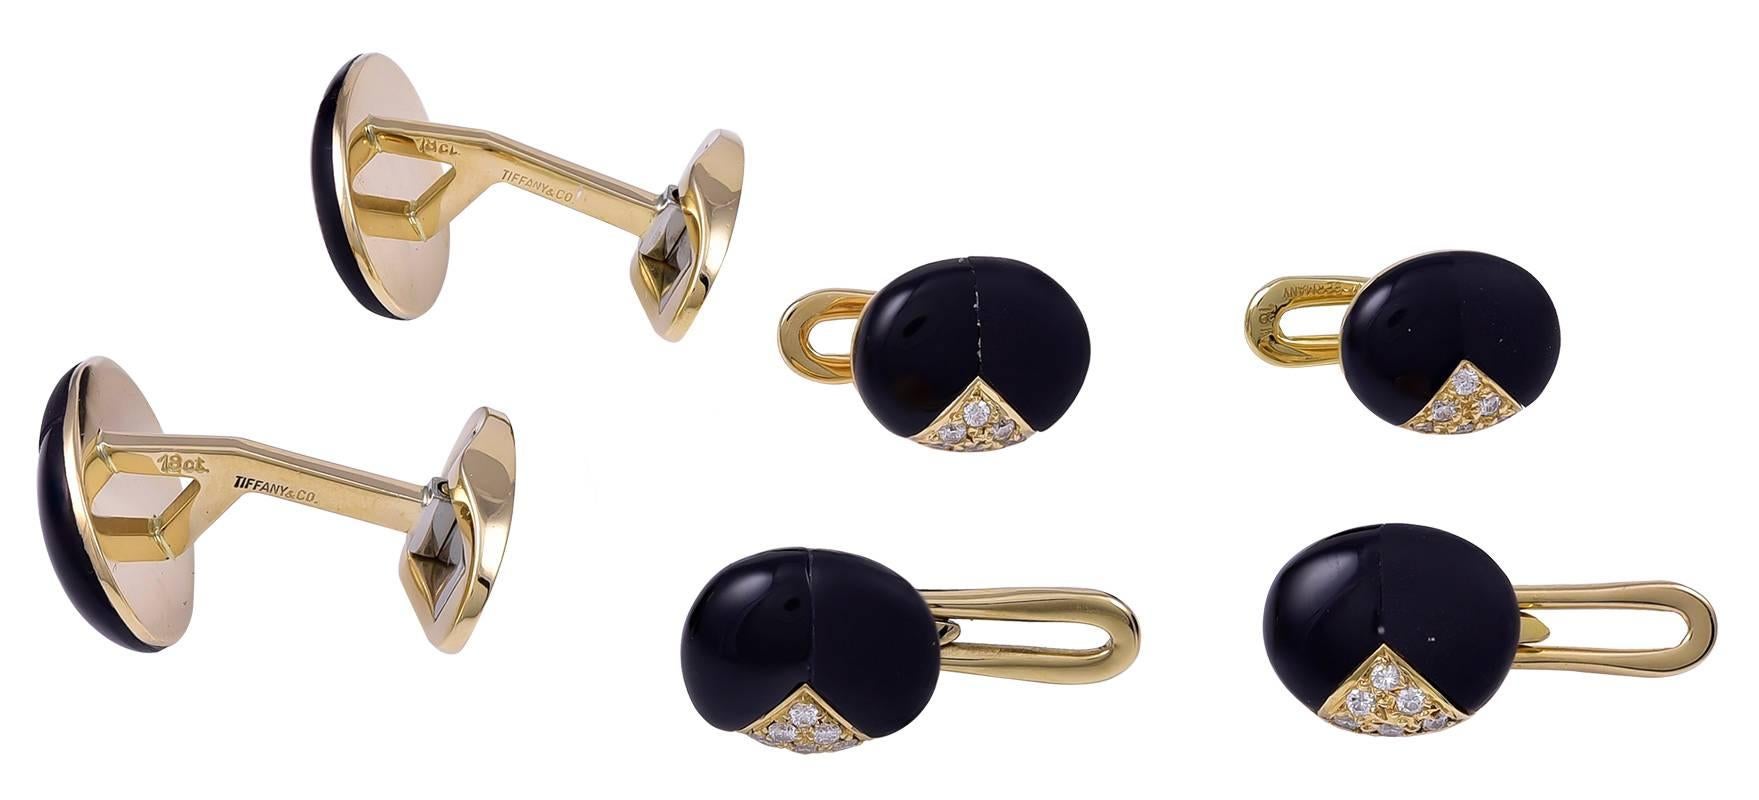 Very handsome and distinguished men's dress set.  Made and signed by TIFFANY & CO.  Heavy gauge 18K yellow gold.  The fronts are onyx; visually very interesting because half of the onyx has a shiny polish and the other half has a matte satin